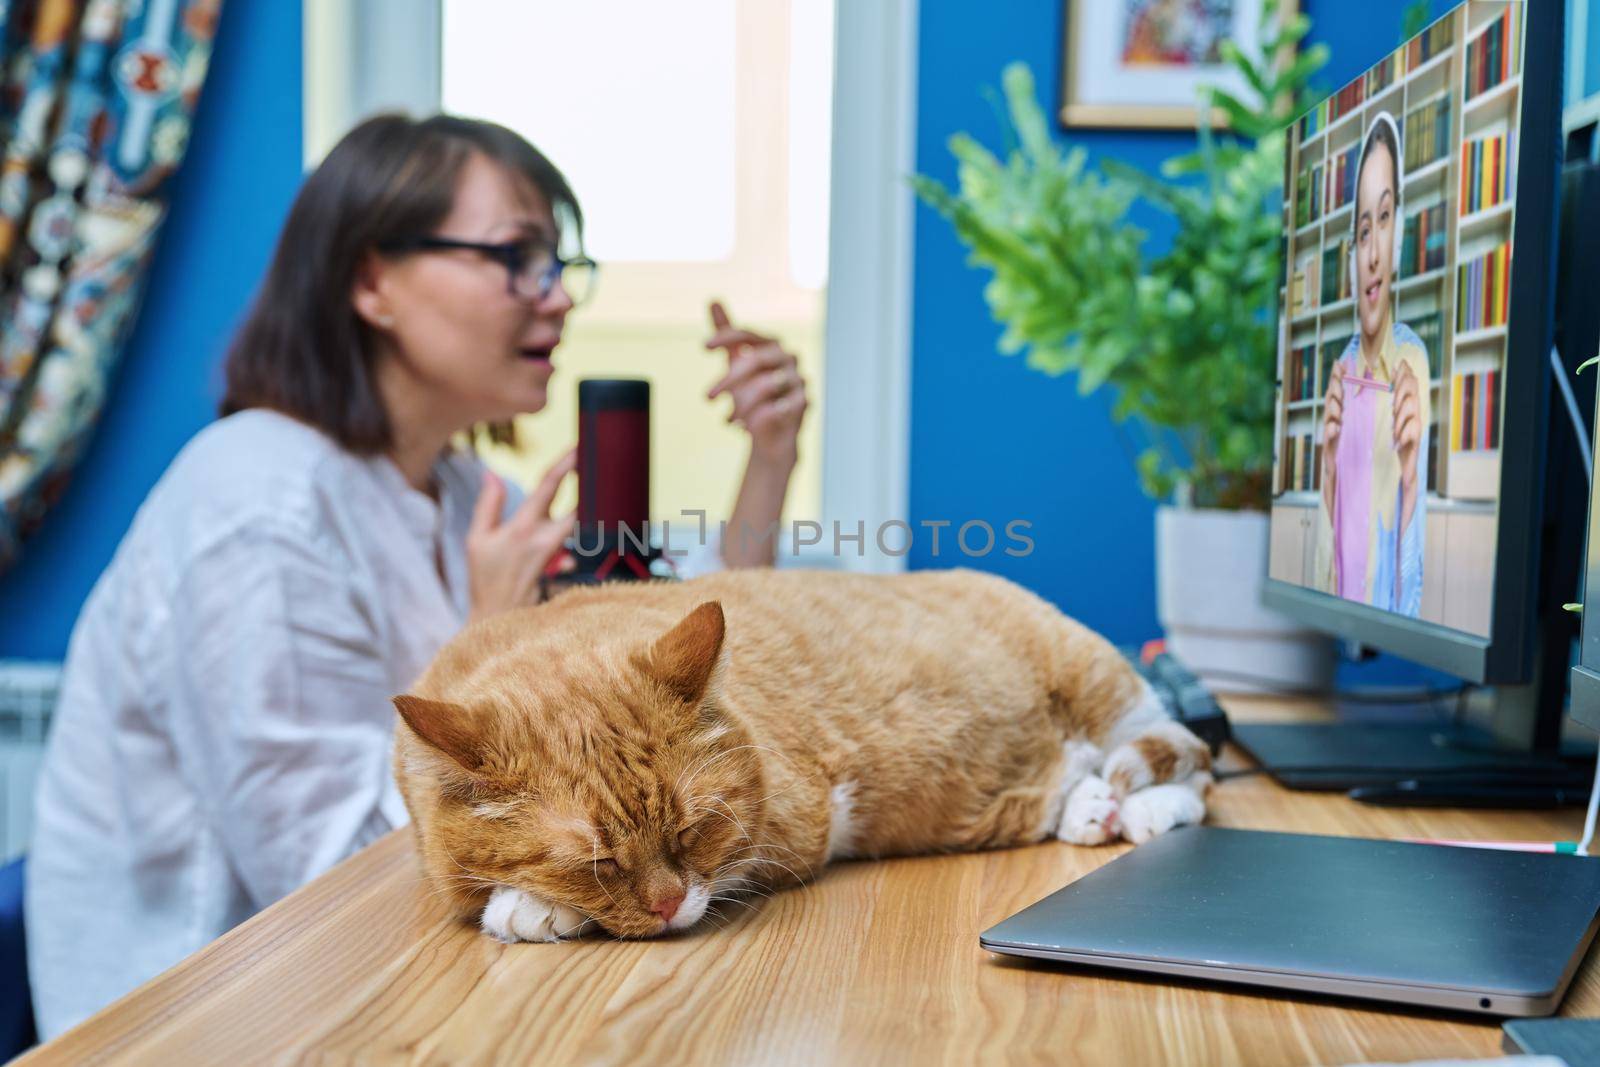 Cat sleeping on desk in home working office, woman making video call chat conference using computer. Remote work at home, pets animals, lifestyle concept